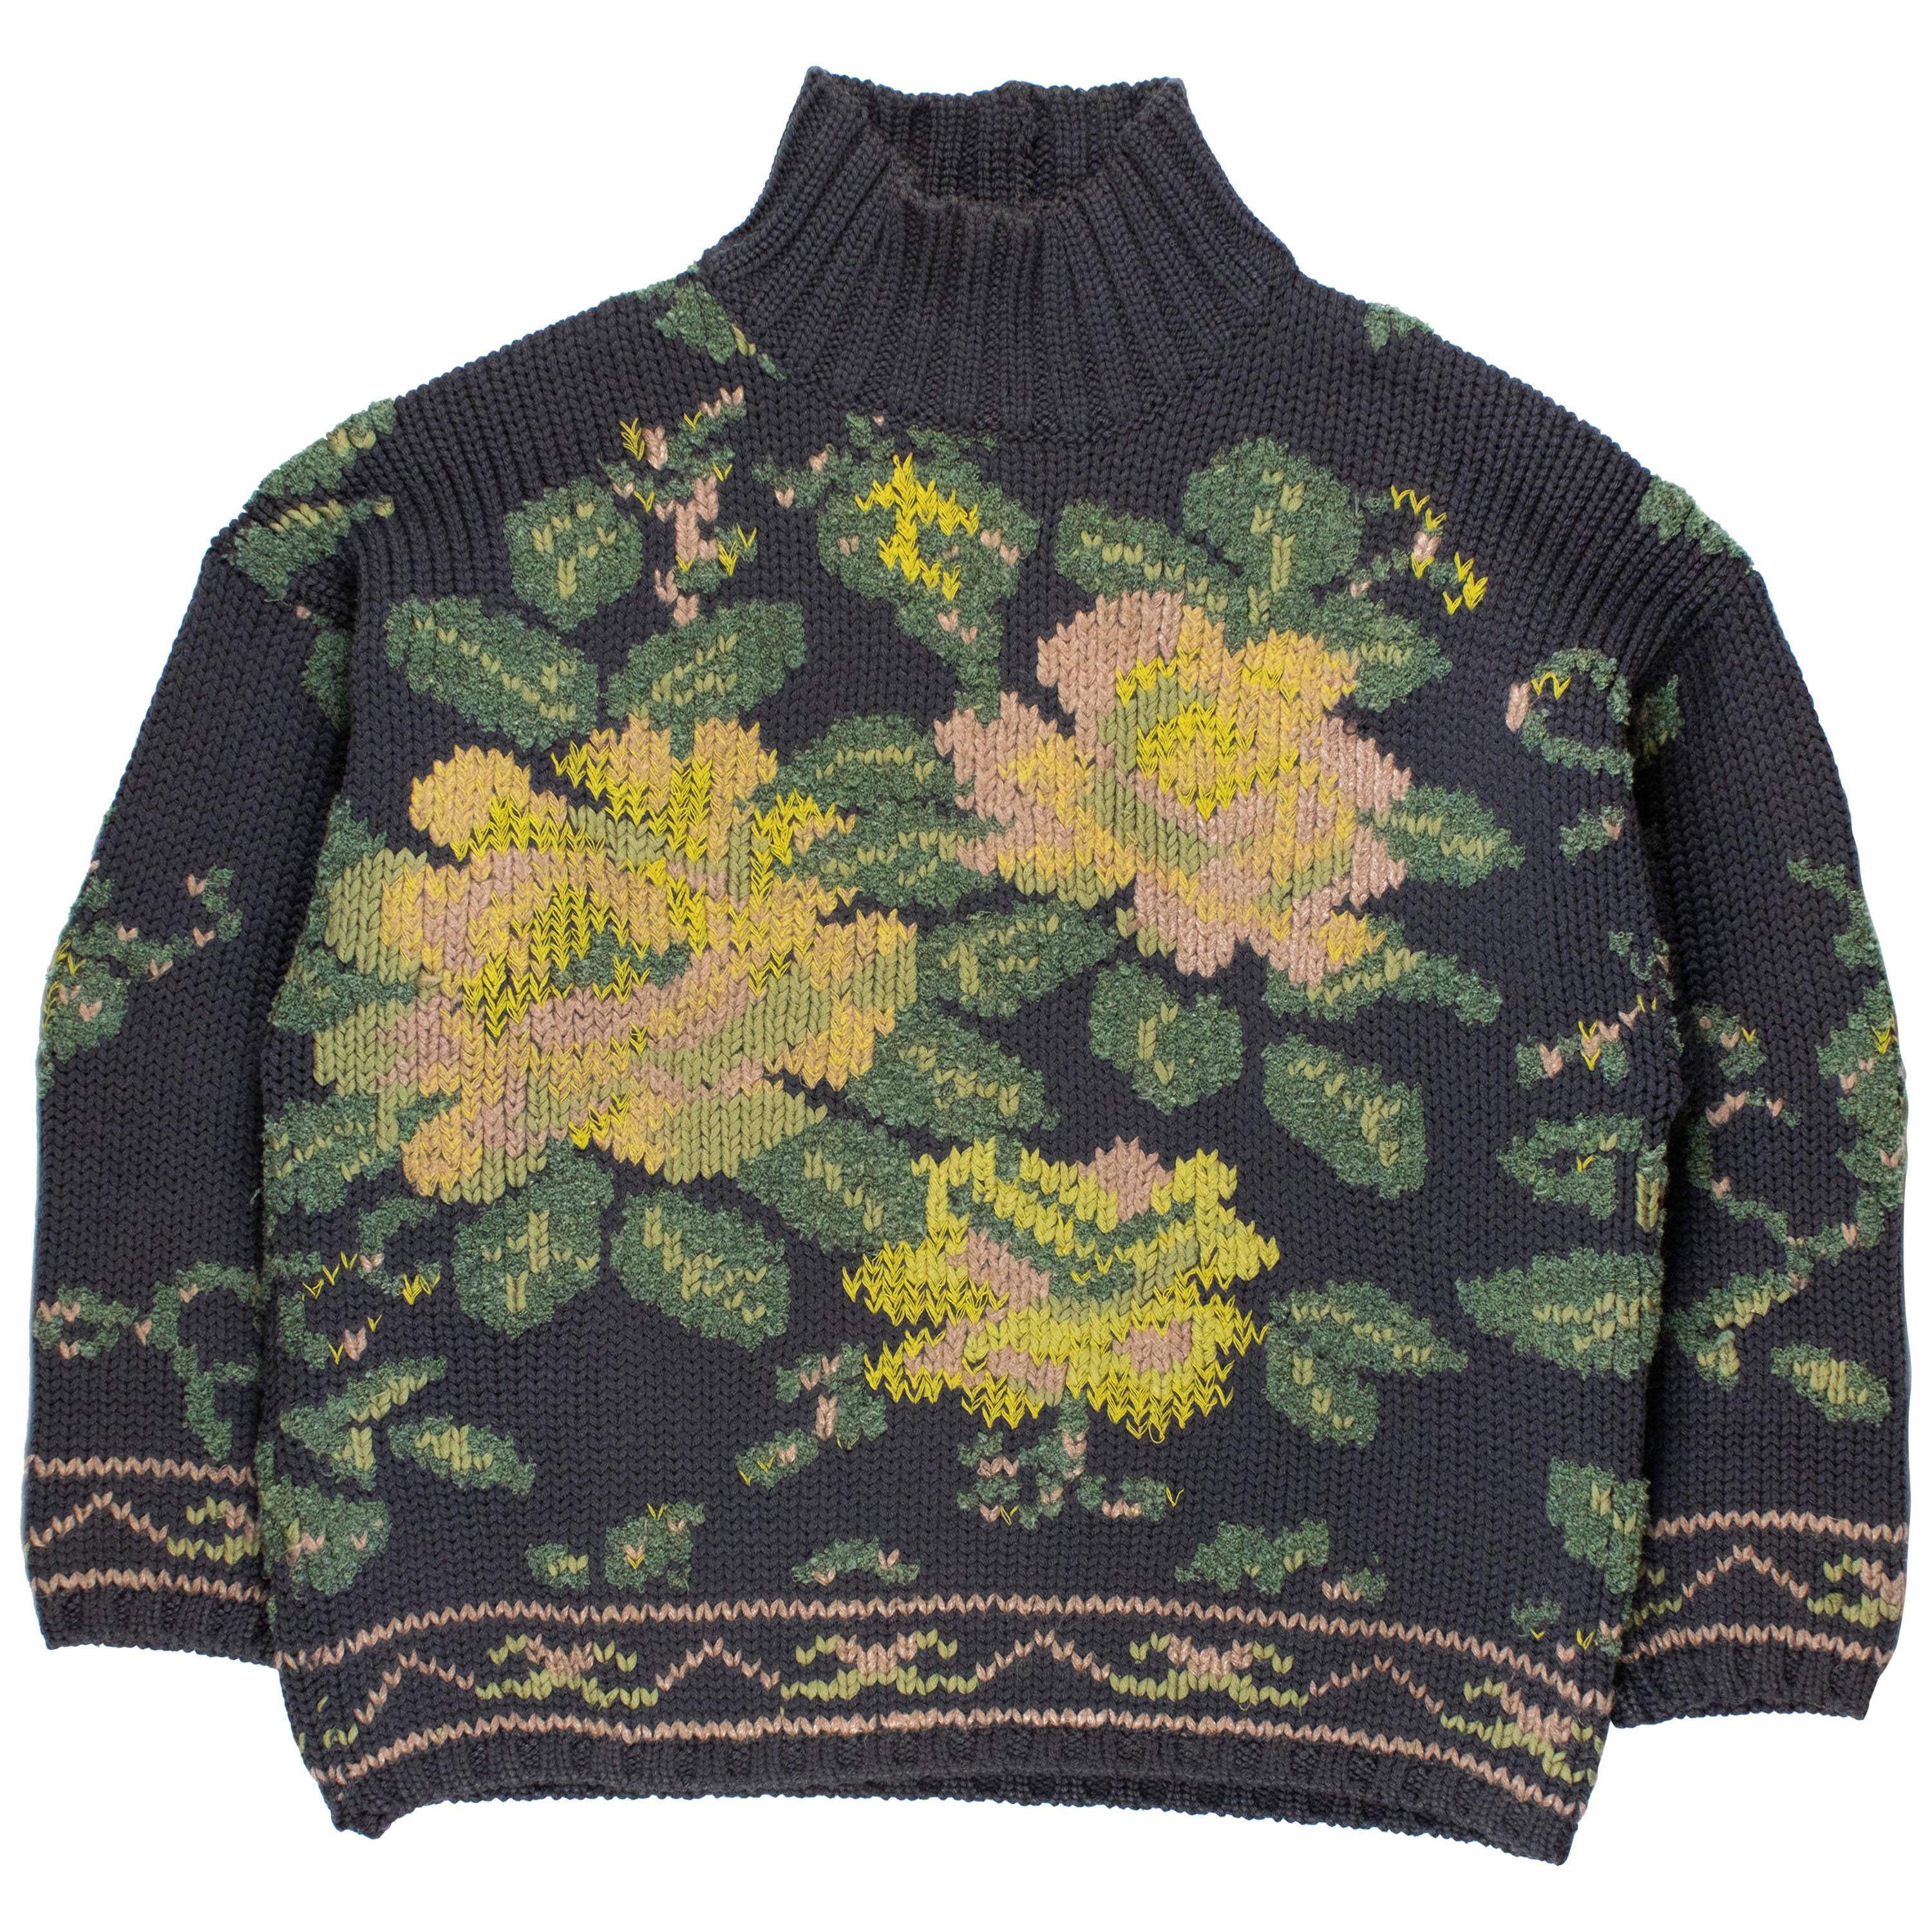 Jean Paul Gaultier AW1984 Floral Sweater